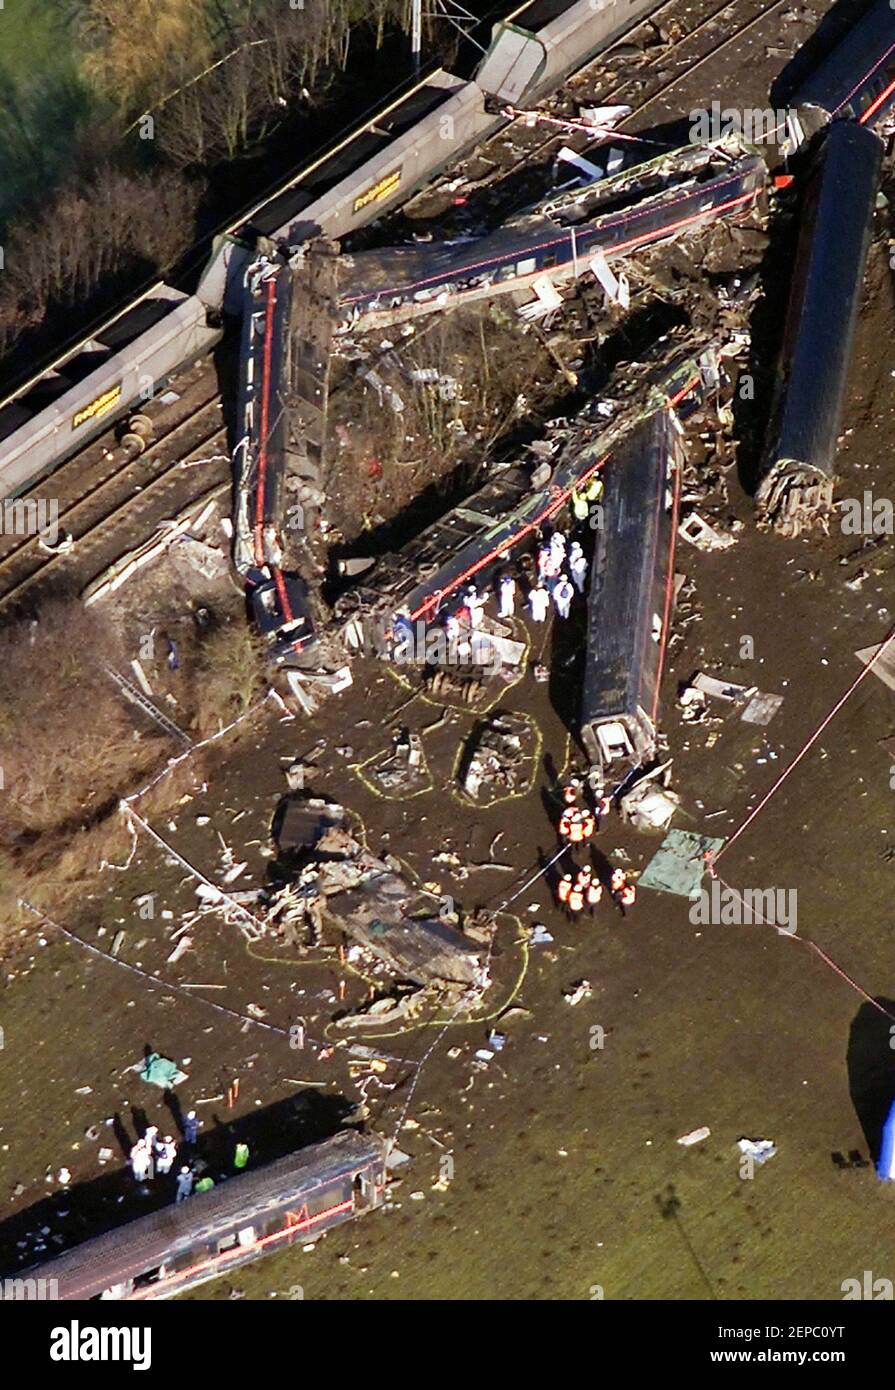 File photo dated 13/12/01 of an aerial view of the scene of the horrific crash in Selby North Yorks, where two train drivers, two others GNER staff and six passengers died on February 28 2001, after the Newcastle to London passenger service struck a Land Rover which had careered off the M62 motorway and crashed onto the track. Issue date: Saturday February 27, 2021. Final preparations are under way the mark the 20th anniversary of the Selby Rail Crash - the worst UK rail tragedy of the 21st century. Stock Photo